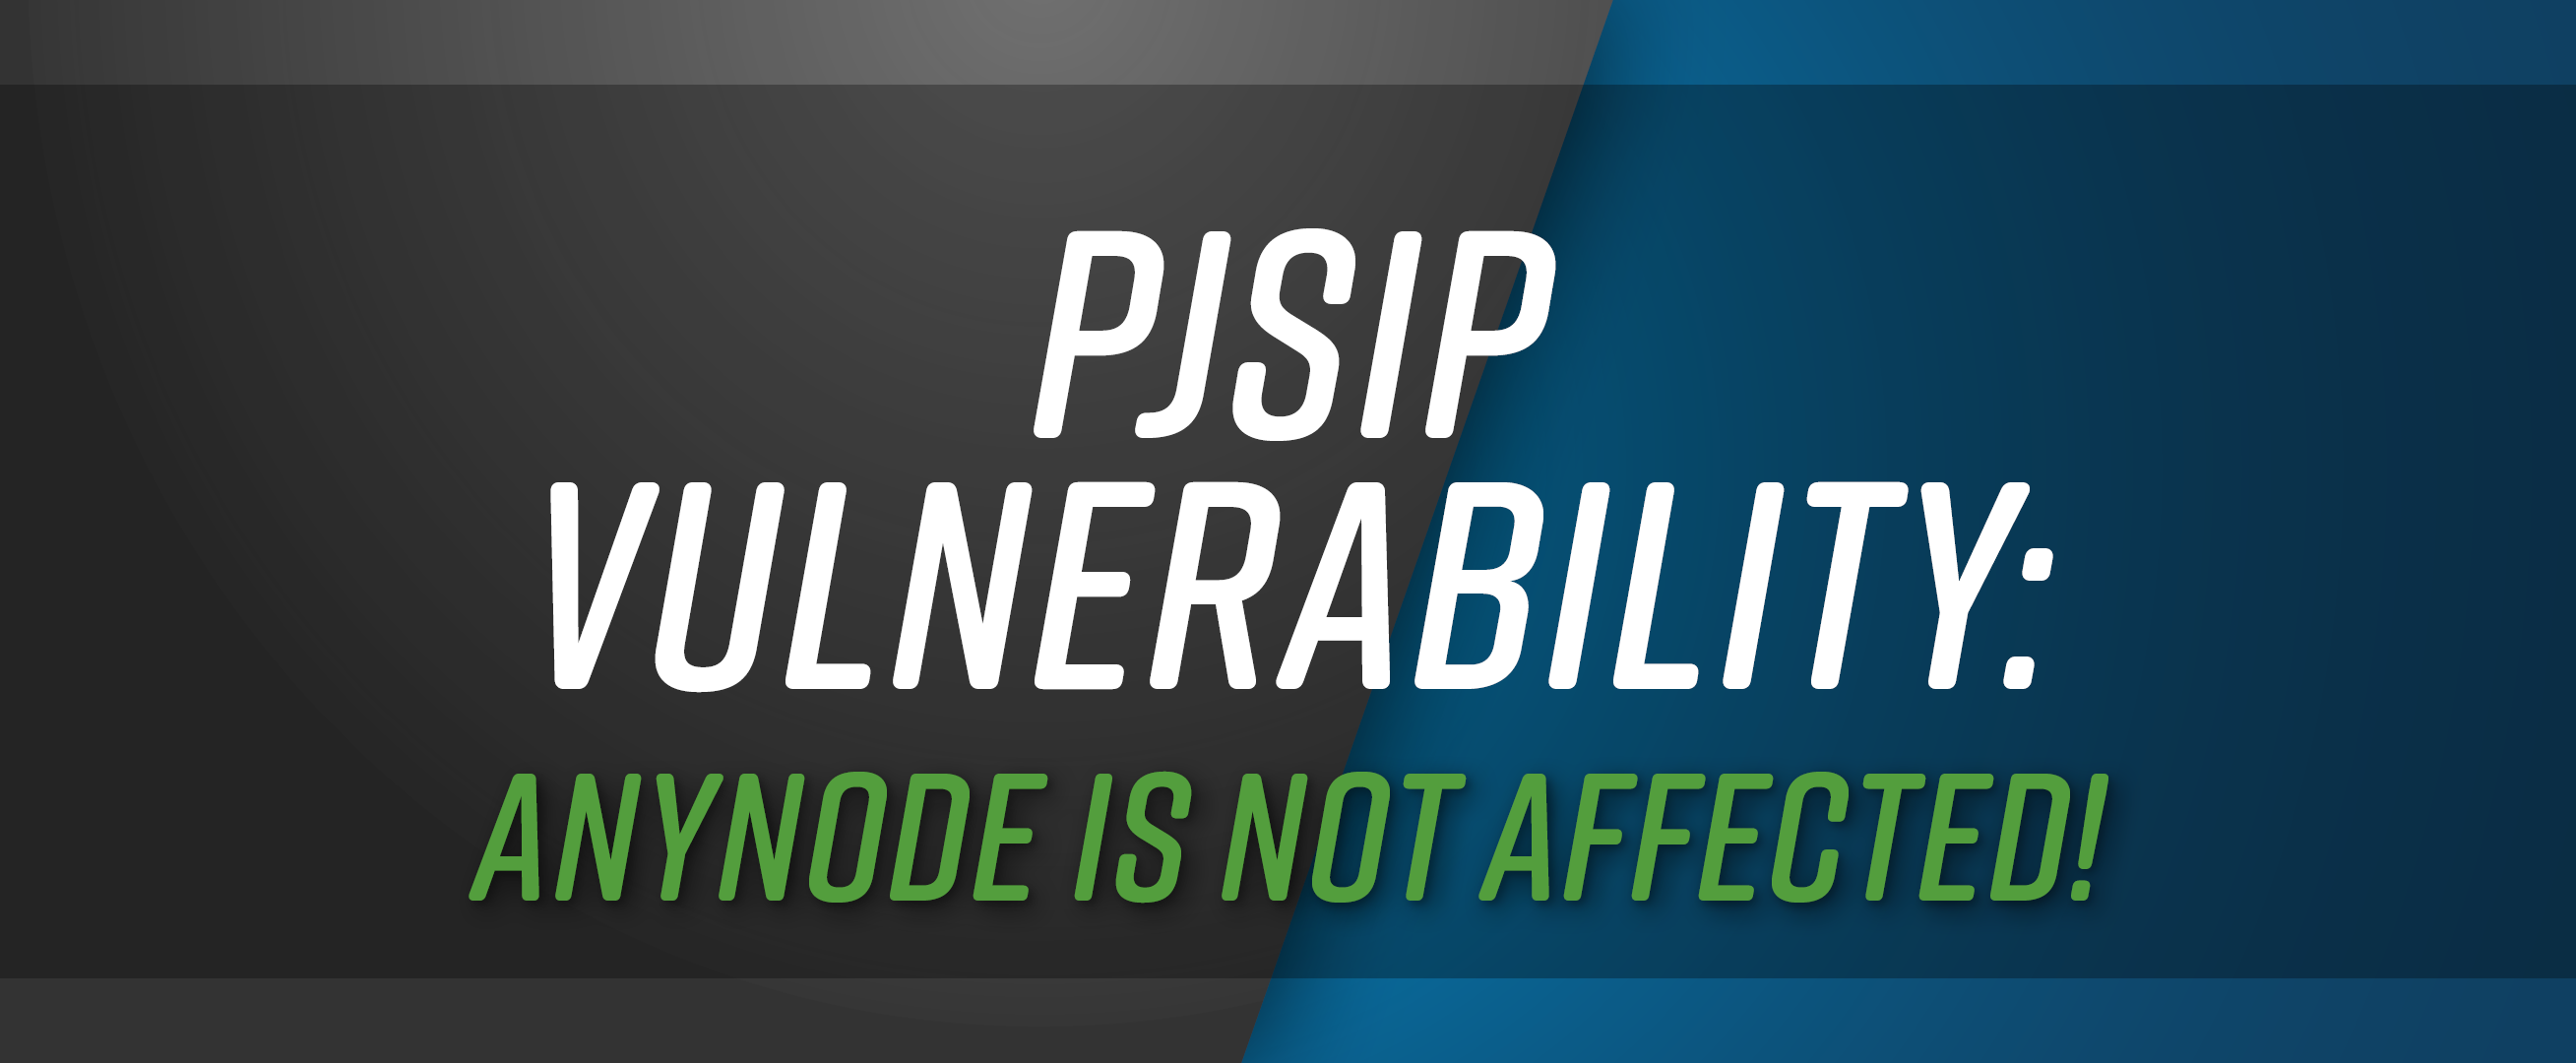 PJSIP vulnerability: anynode is not affected